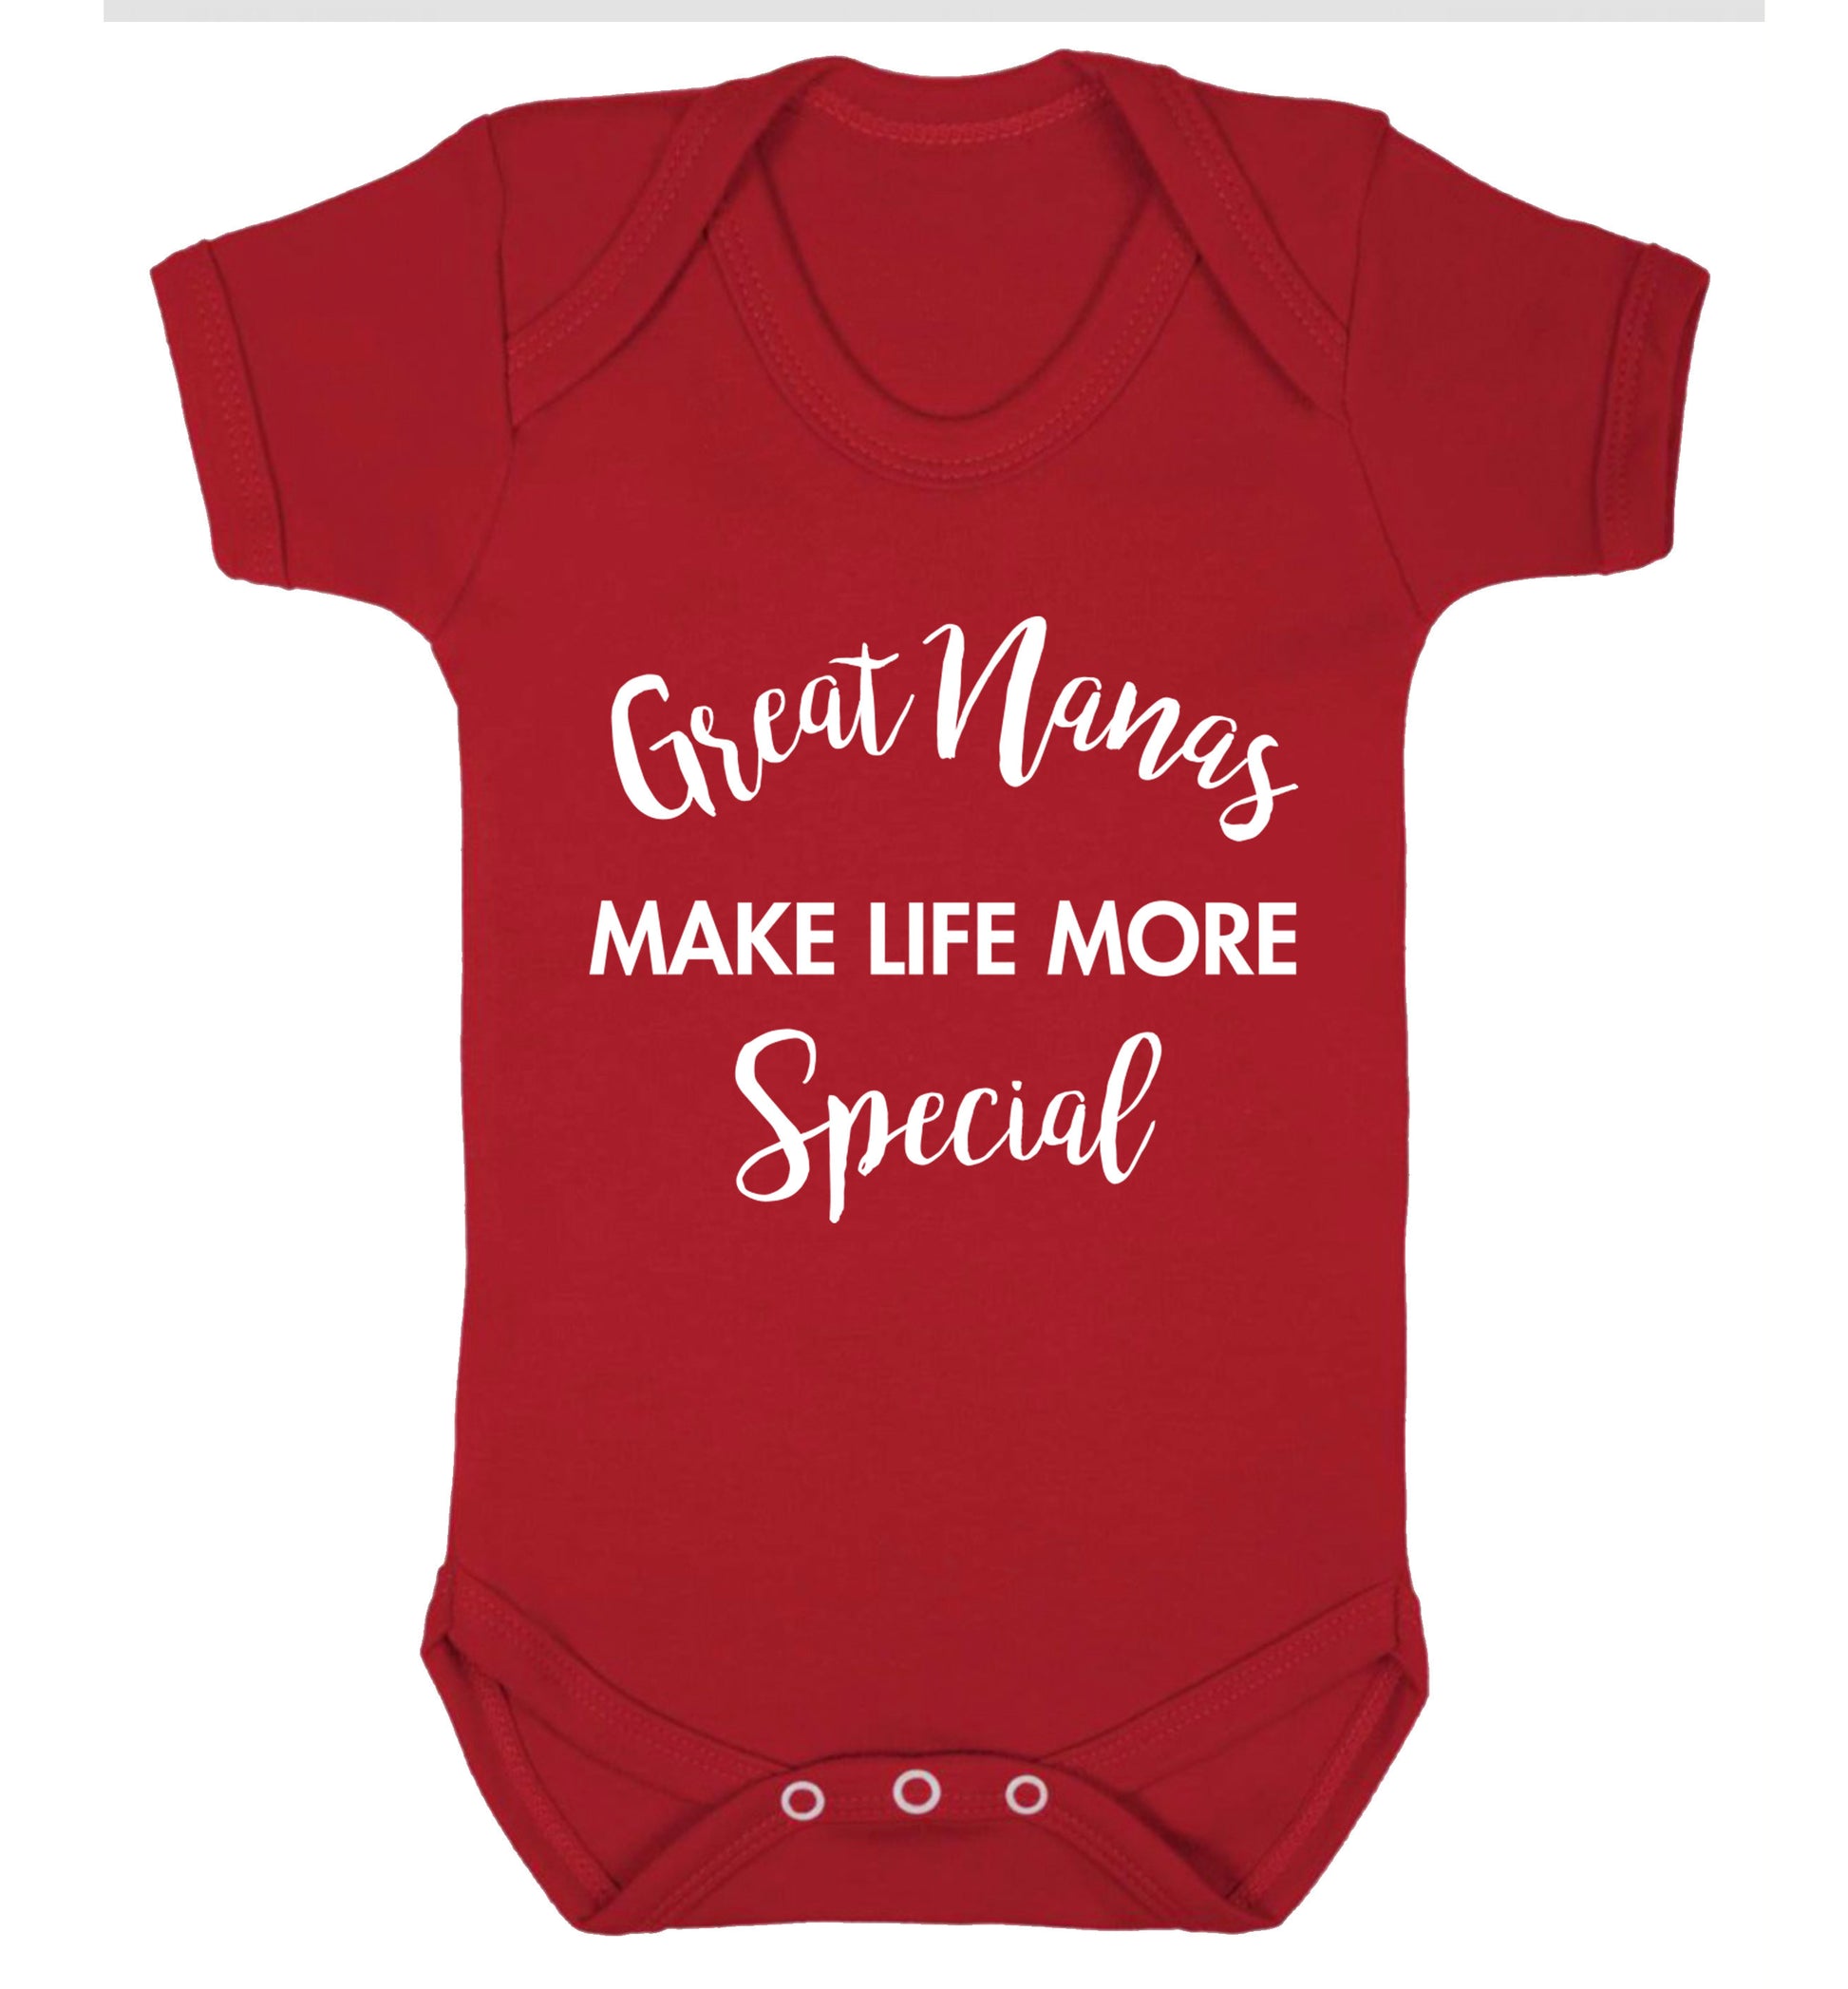 Great nanas make life more special Baby Vest red 18-24 months